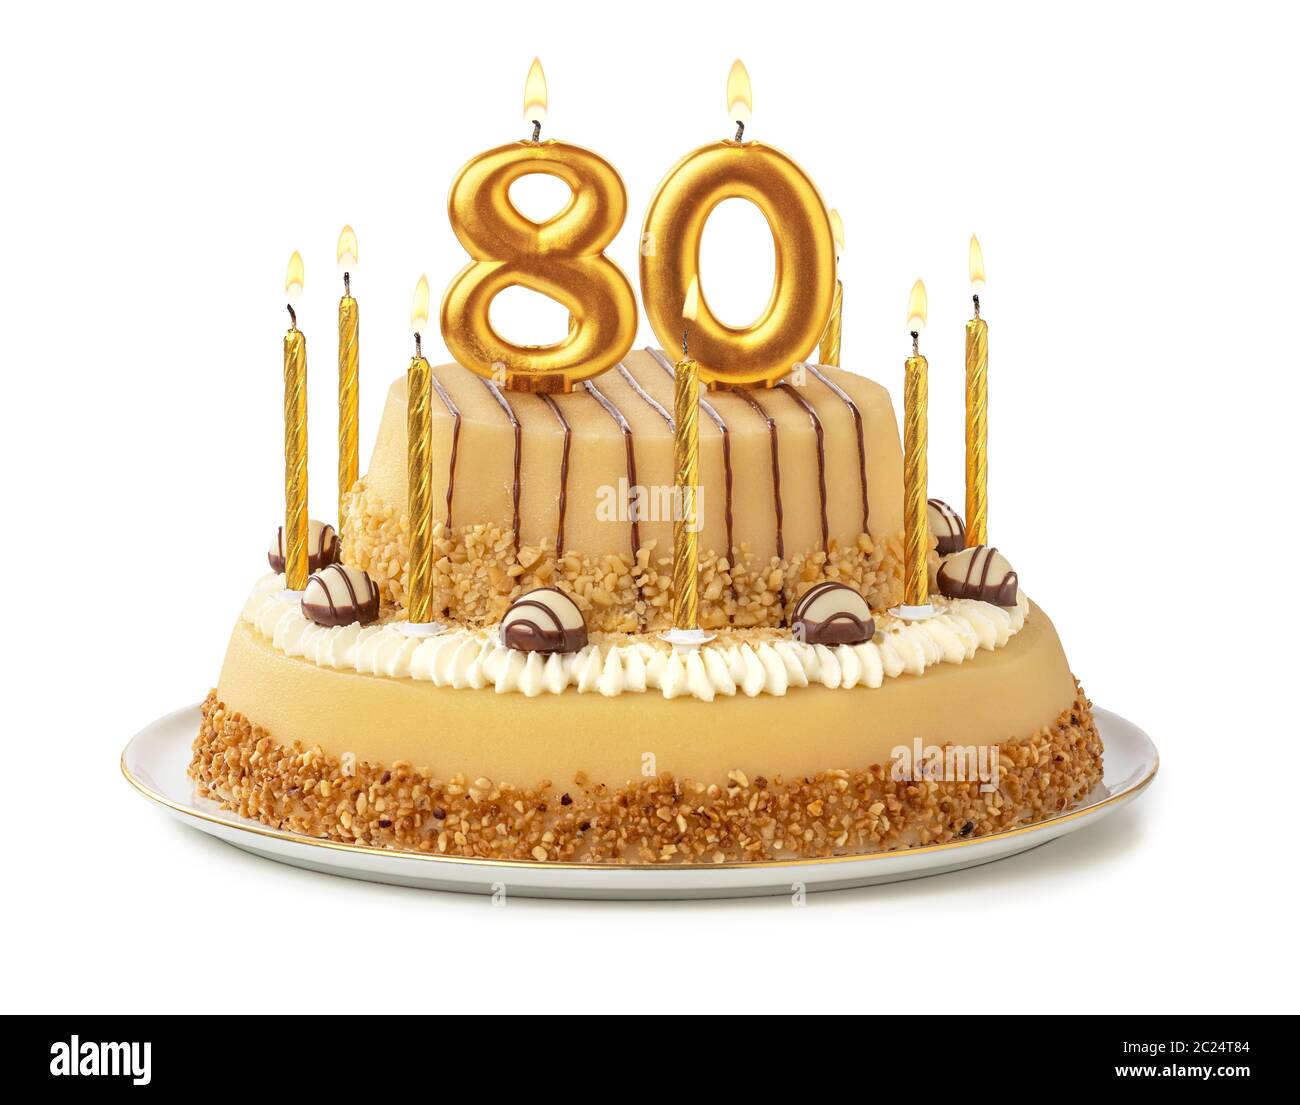 Festive cake with golden candles - Number 80 Stock Photo